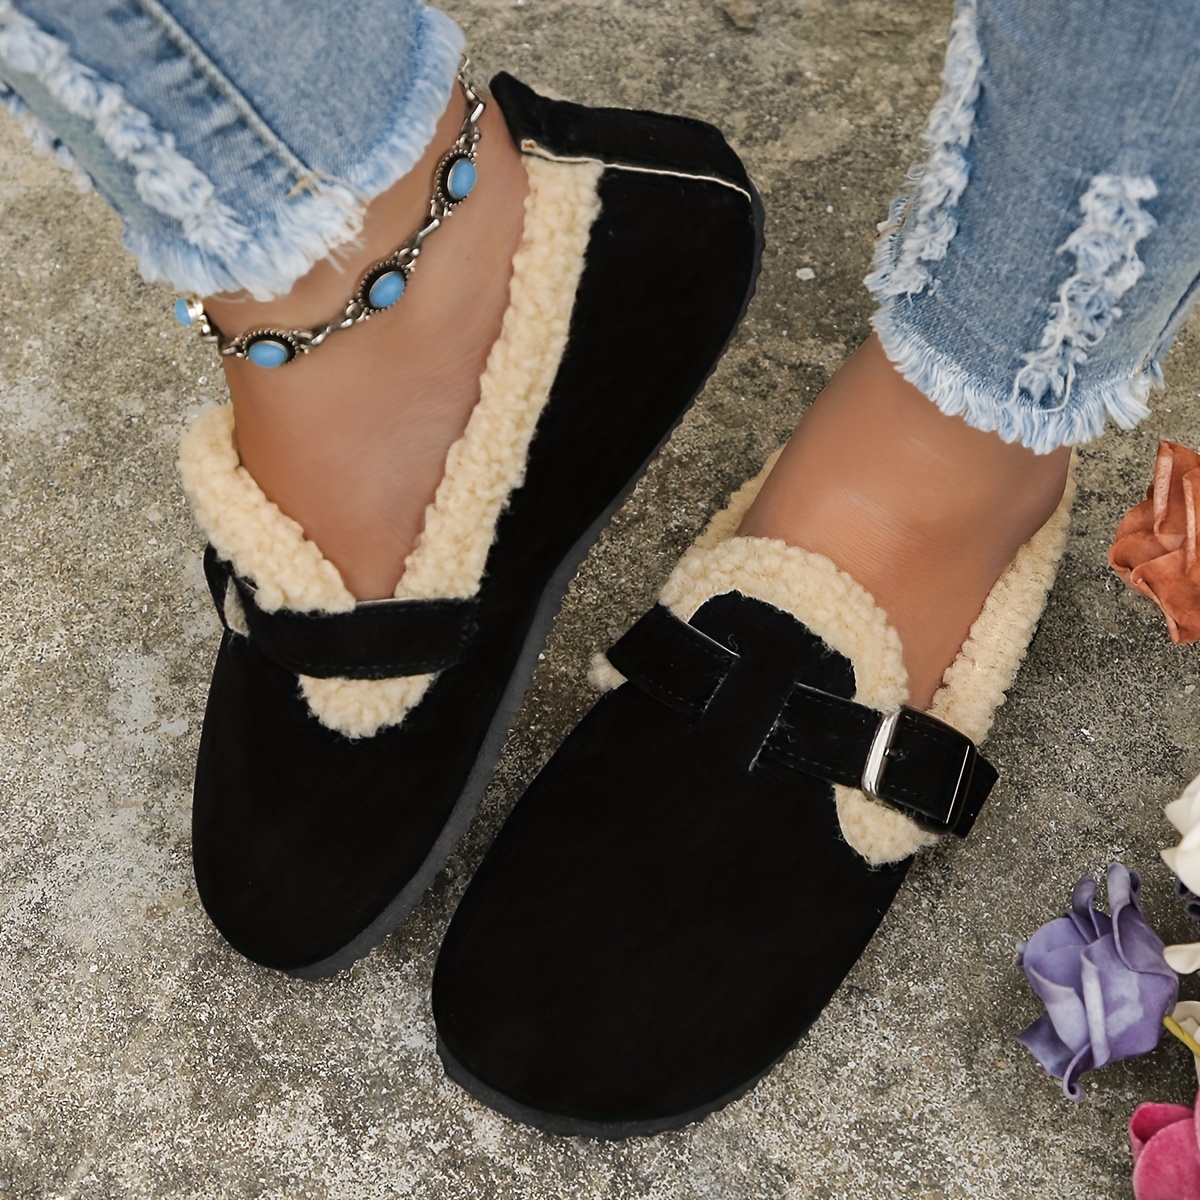 Women’s Solid Color Fuzzy Mules, Slip On Soft Sole Flat Warm Lined Shoes, Plush Round Toe Fluffy Shoes